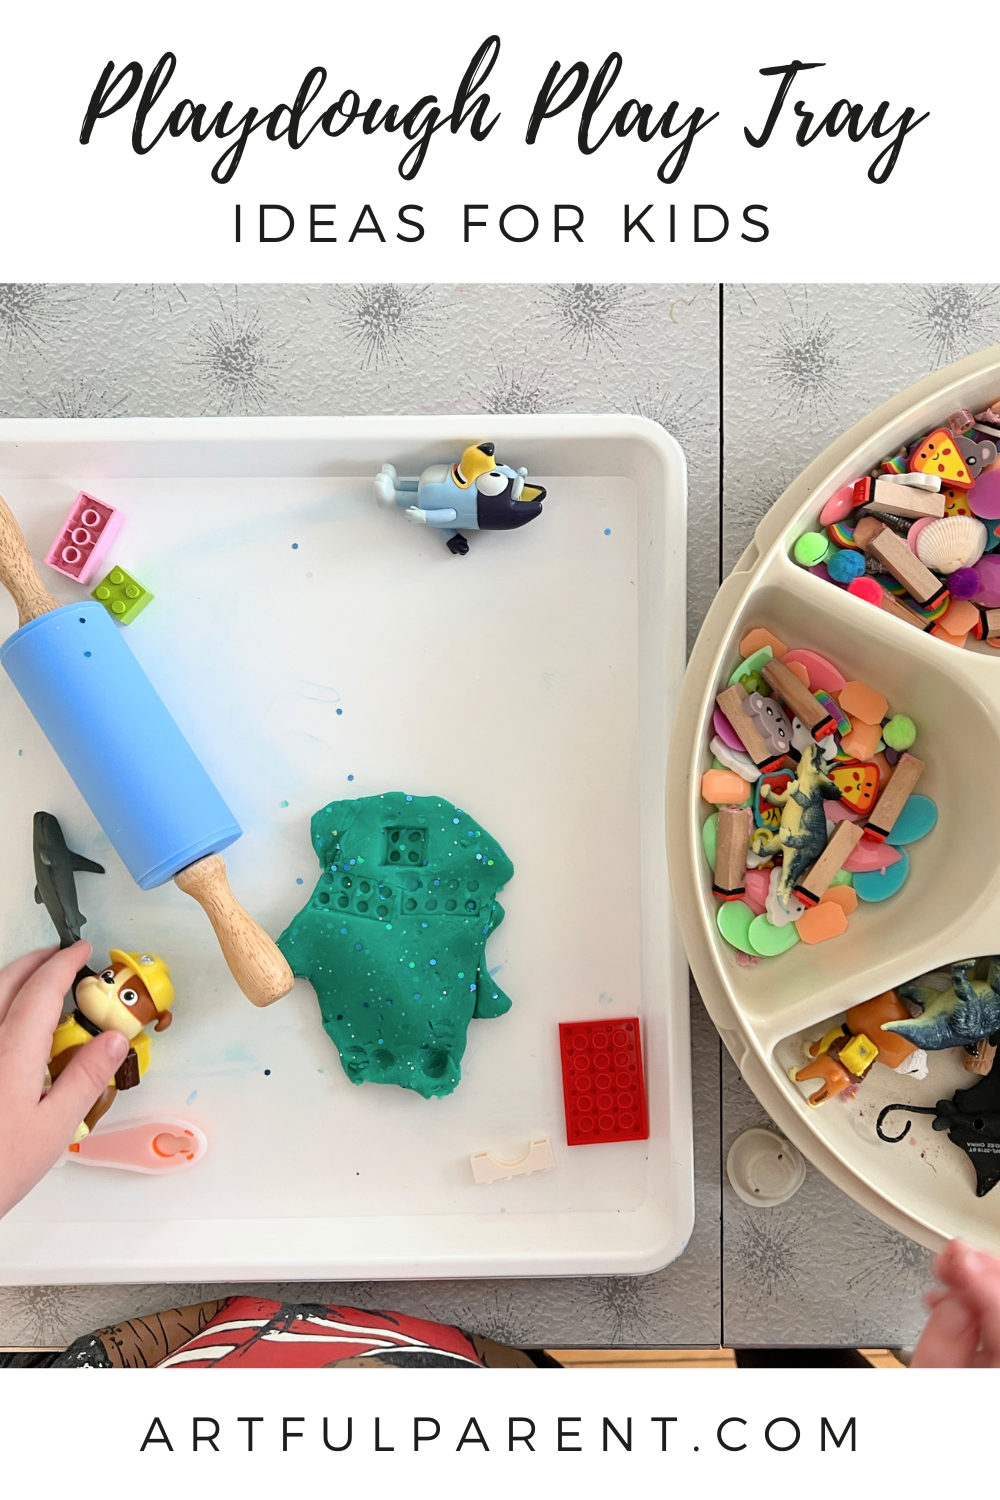 How to Set Up a Playdough Play Tray